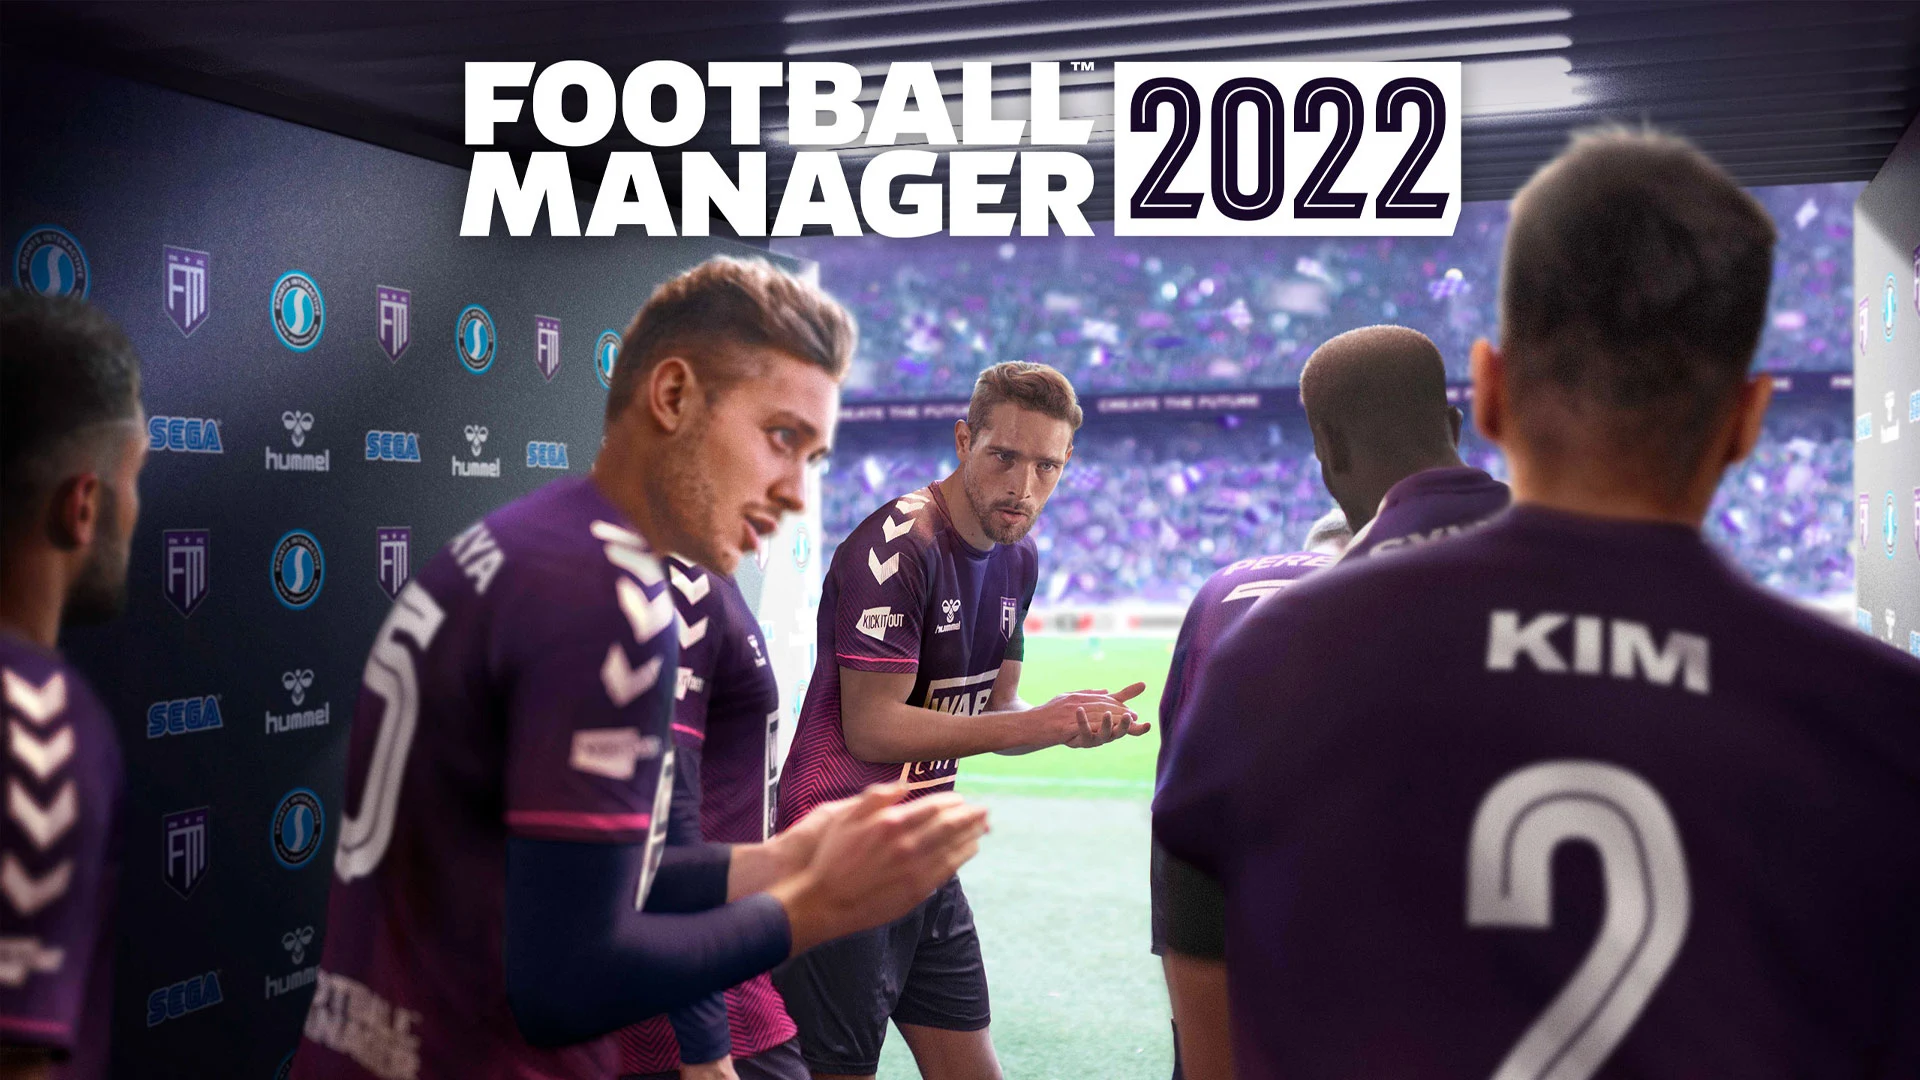 Football Manager 2022 Free Download, Football Manager 2022 Download, football manager 2022 crack,football manager 2022 download,football manager 2022,football manager 2022 torrent,fm 2022 download crack,football manager 2022 crack download link,football manager 2022 download cpy,football manager 2022 cracked,football manager 2022 download pc,football manager 2022 pc,football manager 2022 mac,fm 22 free,football manager 2022 download torrent pc free,how to download fm 2022,football manager 2022 game download,crack fm 22 cpy codex,football manager 2022,fm22,como baixar football manager 2022,football manager 2022 gamepass,como instalar football manager 2022 pelo gamepass,tutorial football manager 2022 gamepass,tutorial fm22 gamepass,tutorial football manager 22 gamepass,como baixar football manager 2022 no pc, download Football Manager 2022 for PC, Football Manager 2022 codex, Football Manager 2022 crack, Football Manager 2022 download, Football Manager 2022 download free, Football Manager 2022 frei, Football Manager 2022 gratuit, Football Manager 2022 herunterladen, Football Manager 2022 iso, Football Manager 2022 jeux, Football Manager 2022 keygen, Football Manager 2022 scaricare, Football Manager 2022 skidrow, Football Manager 2022 Télécharger, Football Manager 2022 torrent, Free download Football Manager 2022, How to download Football Manager 2022